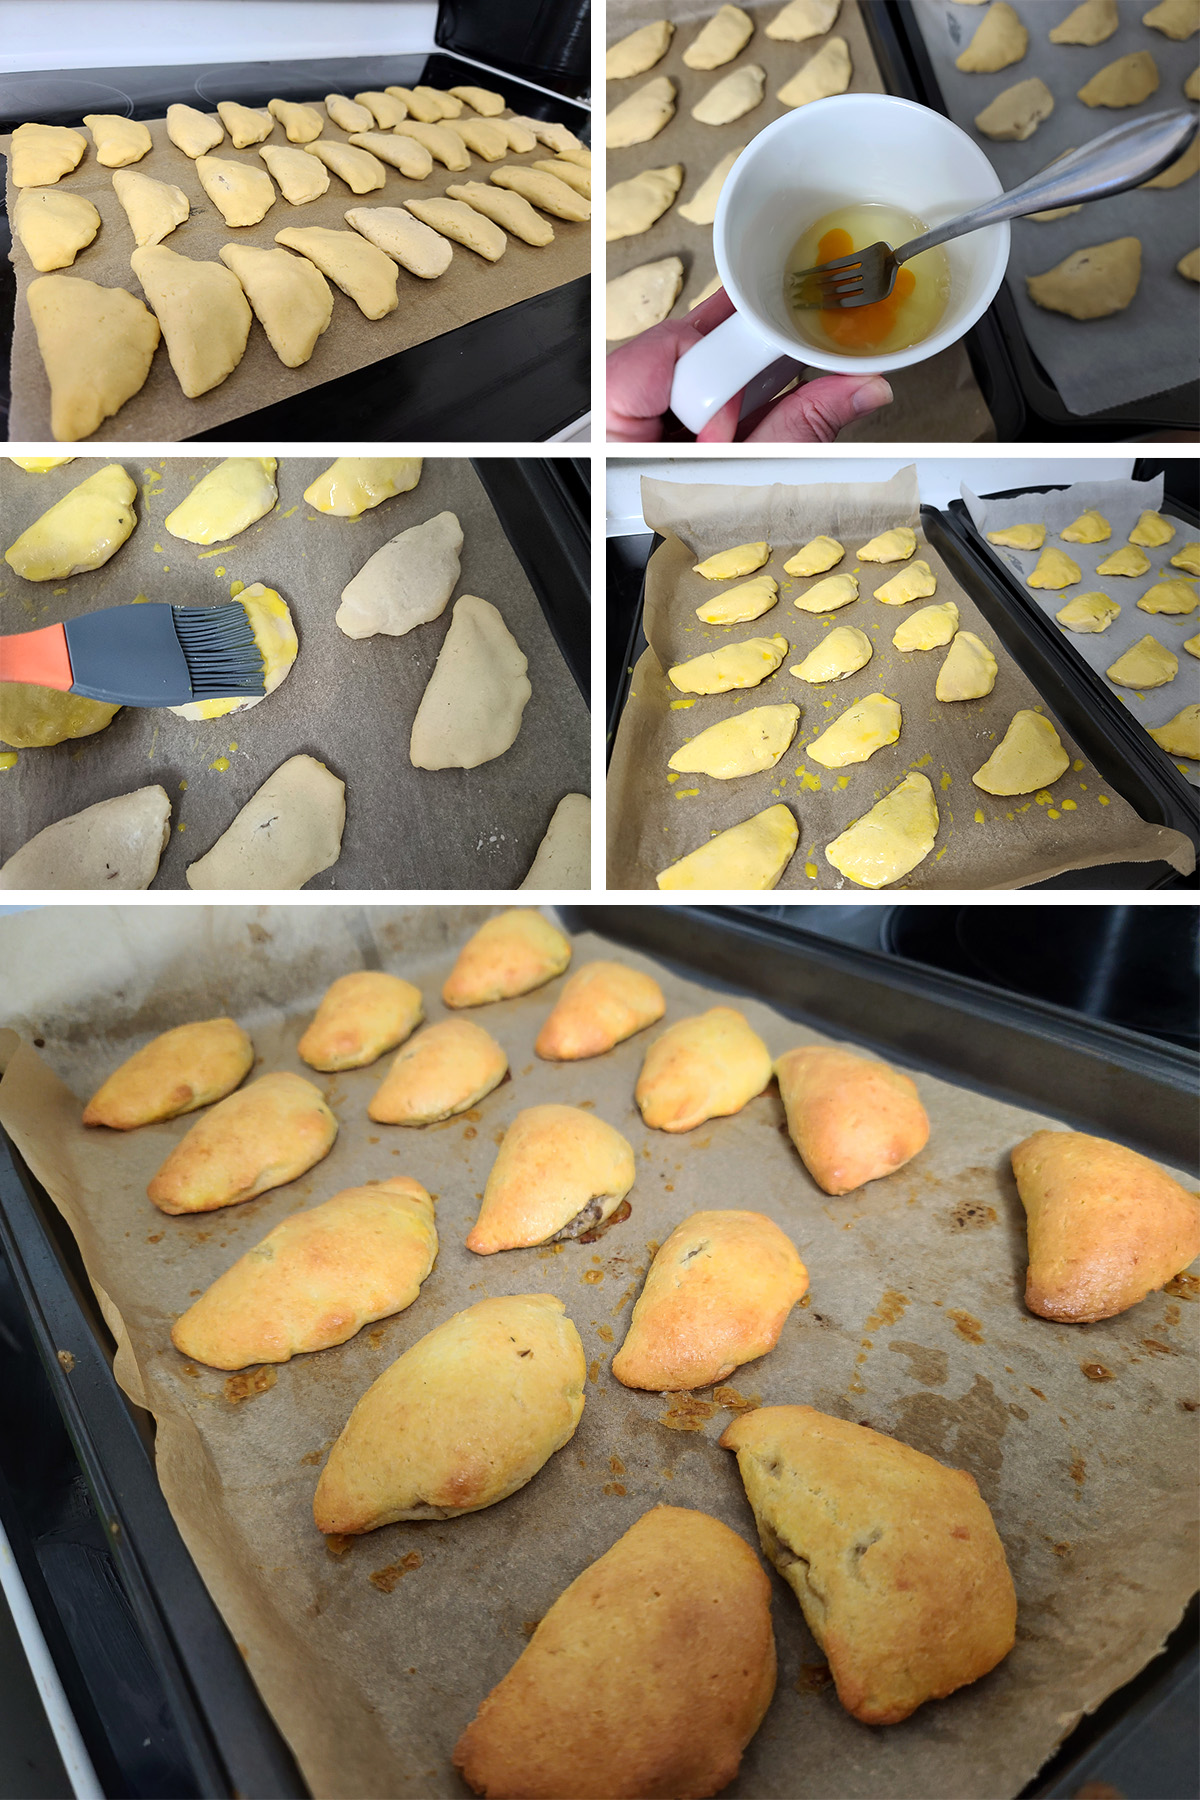 A 5 part image showing the egg and water being mixed together and brushed over the unbaked turnovers, then the finished pan of baked mushroom turnovers.